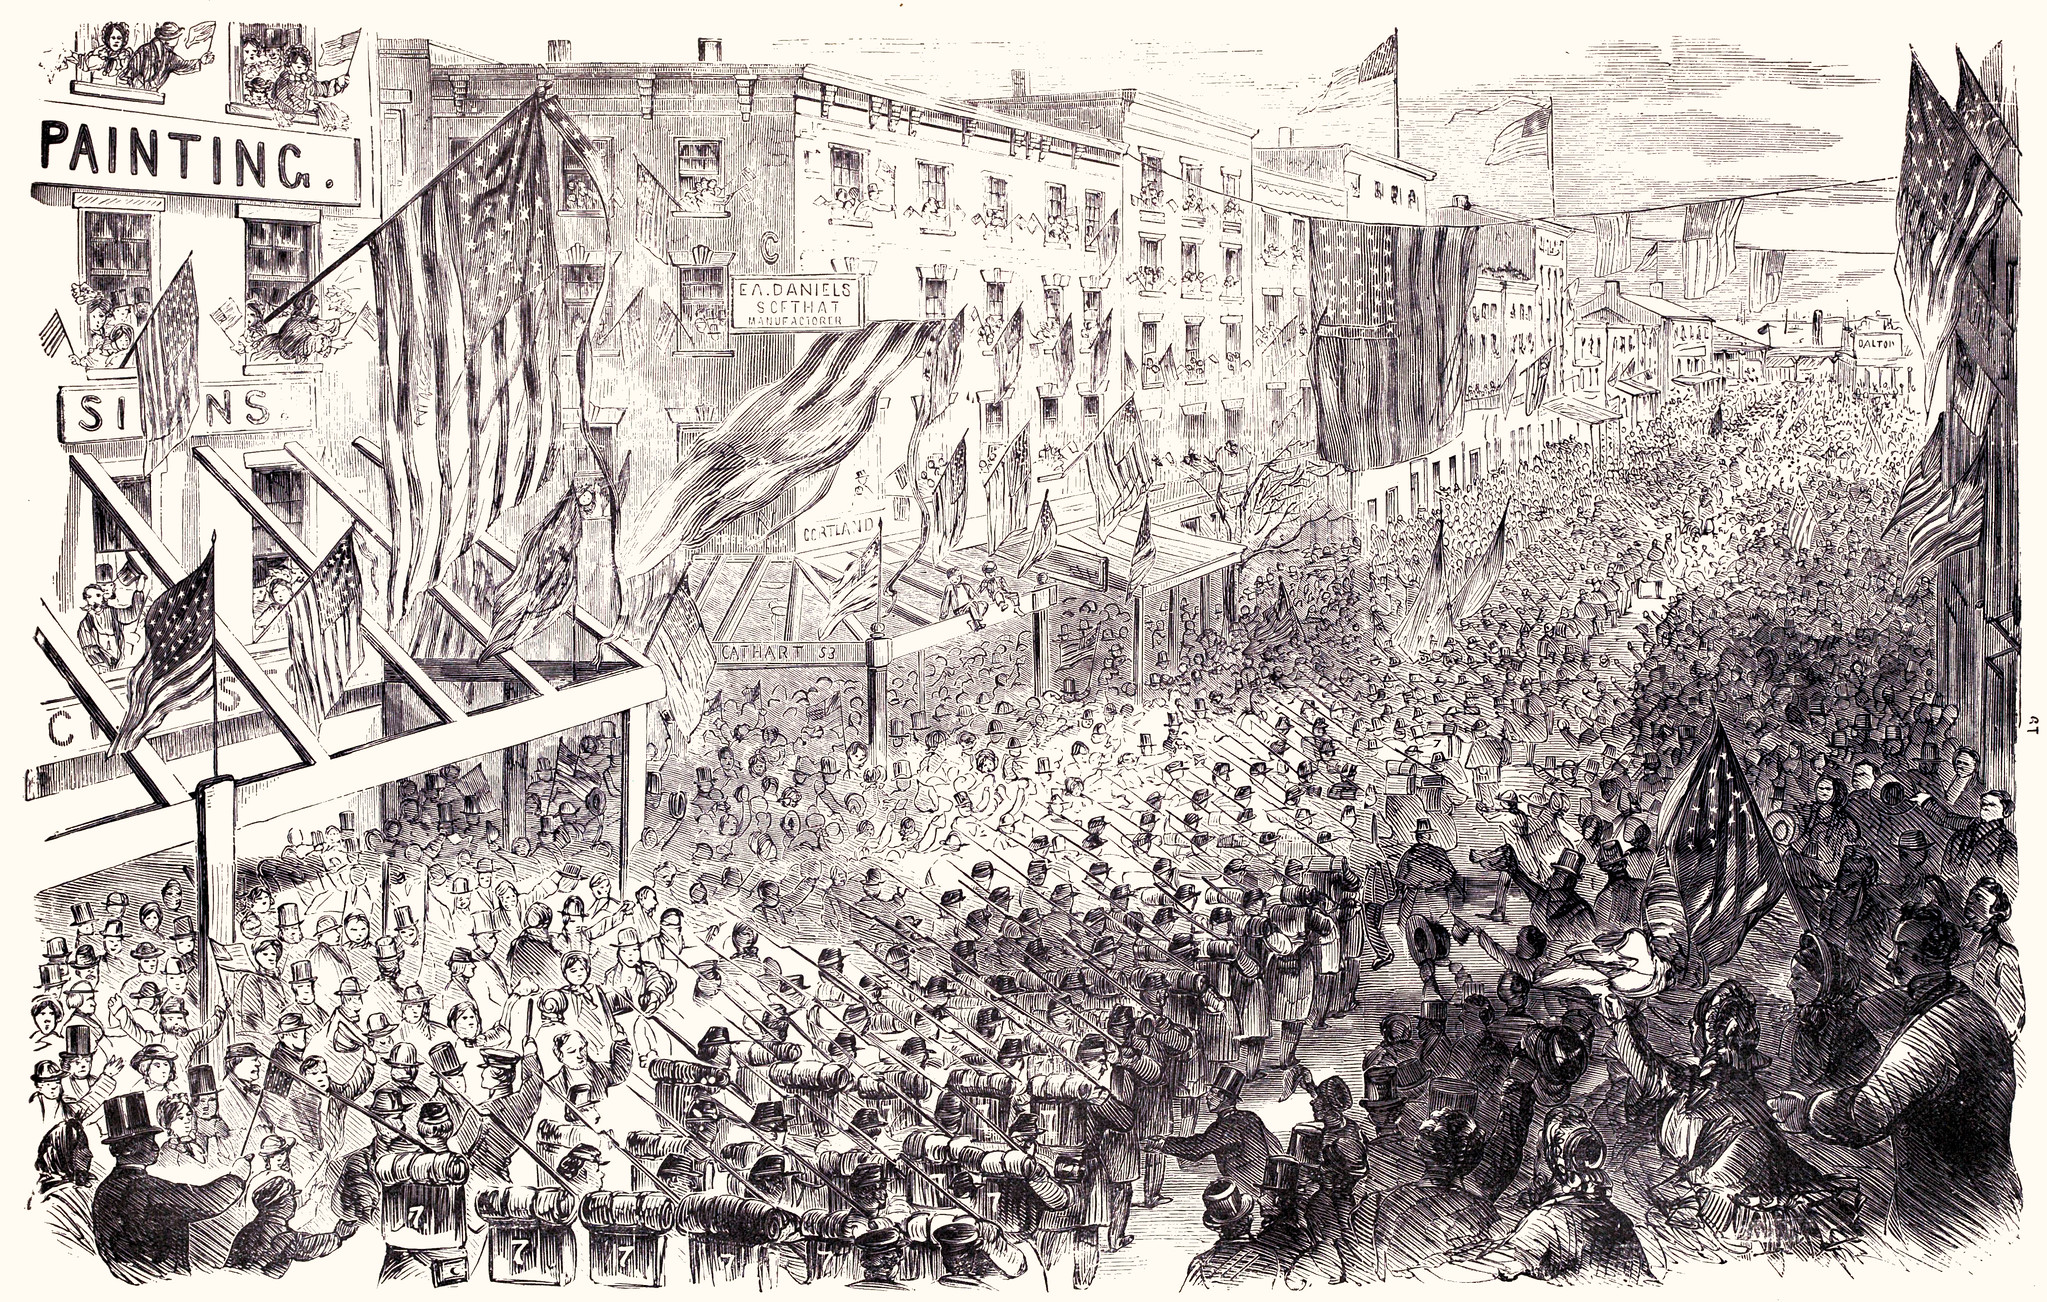 The Seventh Regiment, N. Y. S. M., Passing Down Cortlandt Street on Their Way to the Pennsylvania Railroad Depot, En Route for Washington, D. C., April 19th, 1861